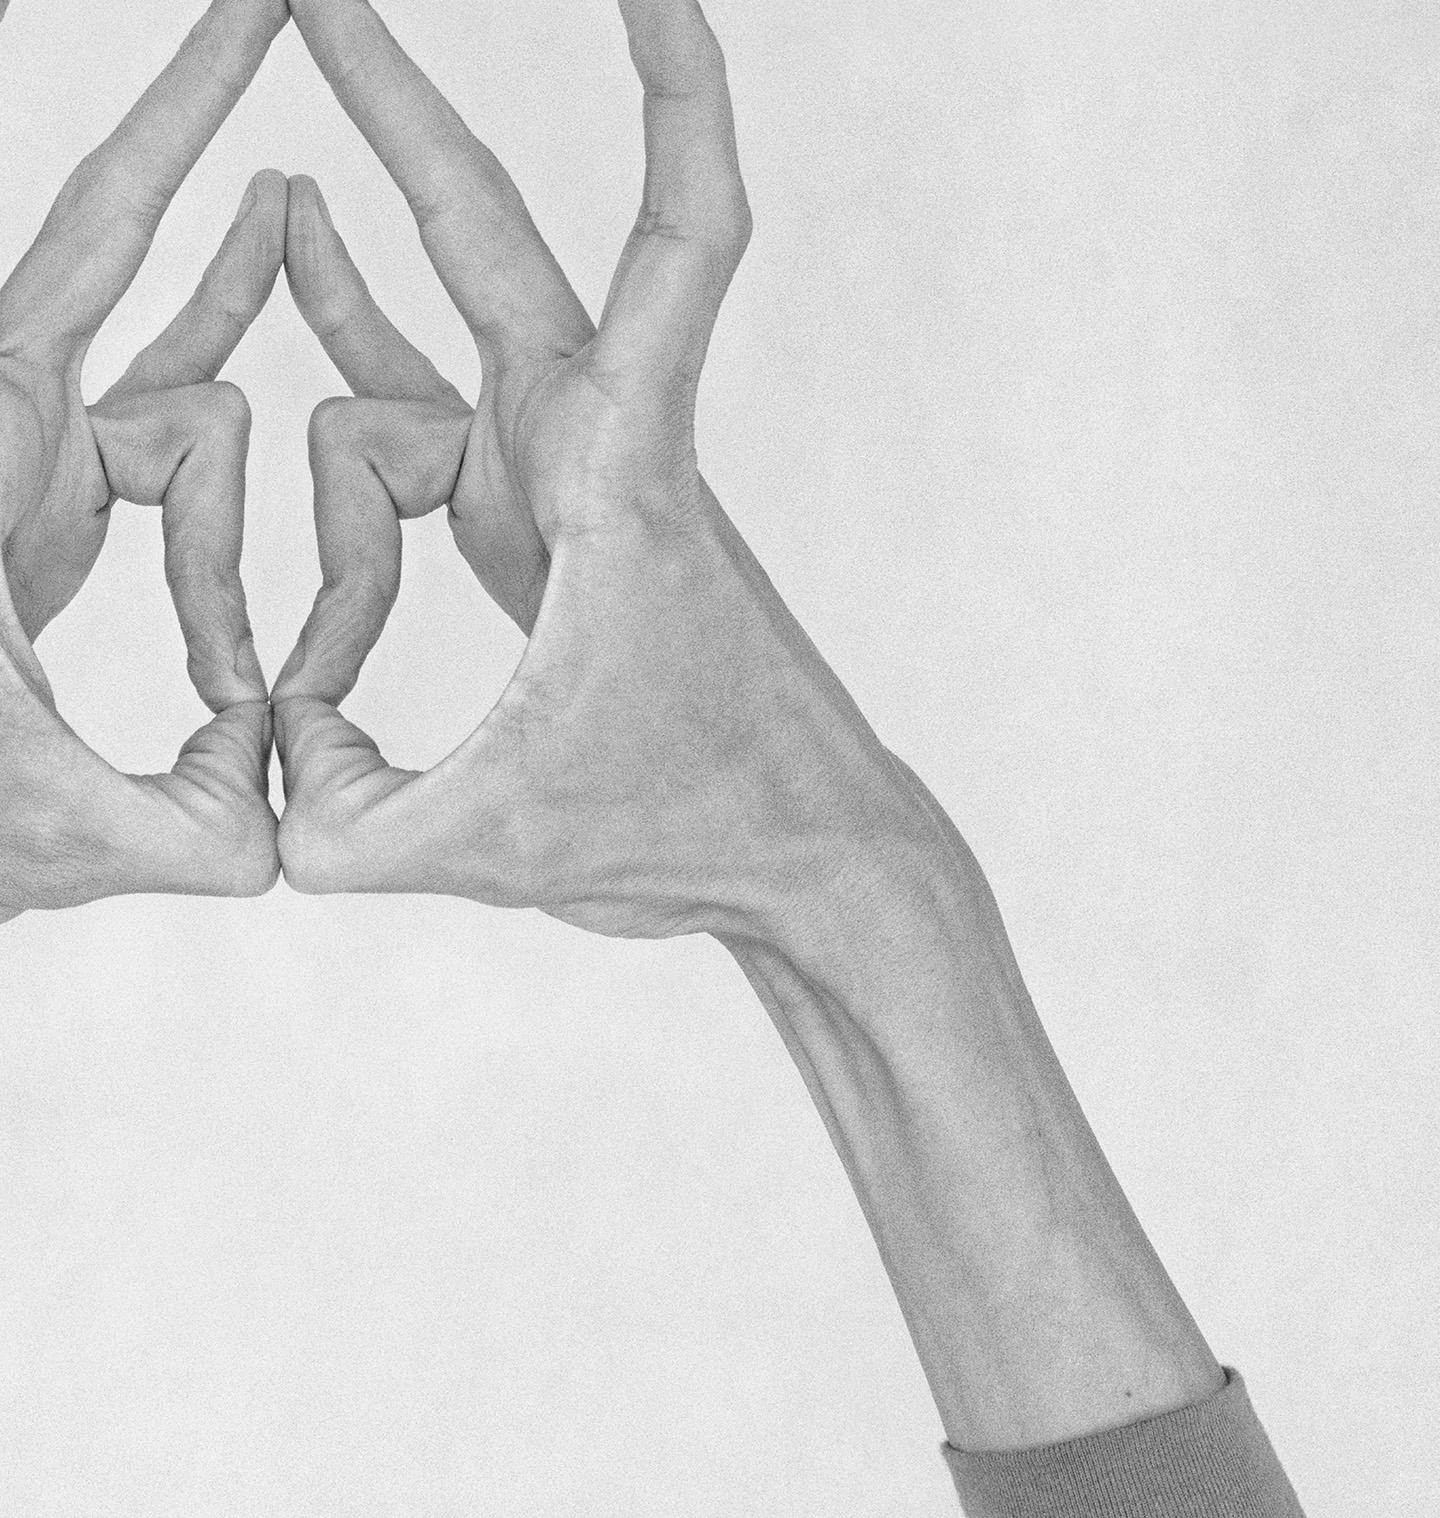 Untitled XIII. From the Series Chiromorphose. Hands. Black & White Photography For Sale 1